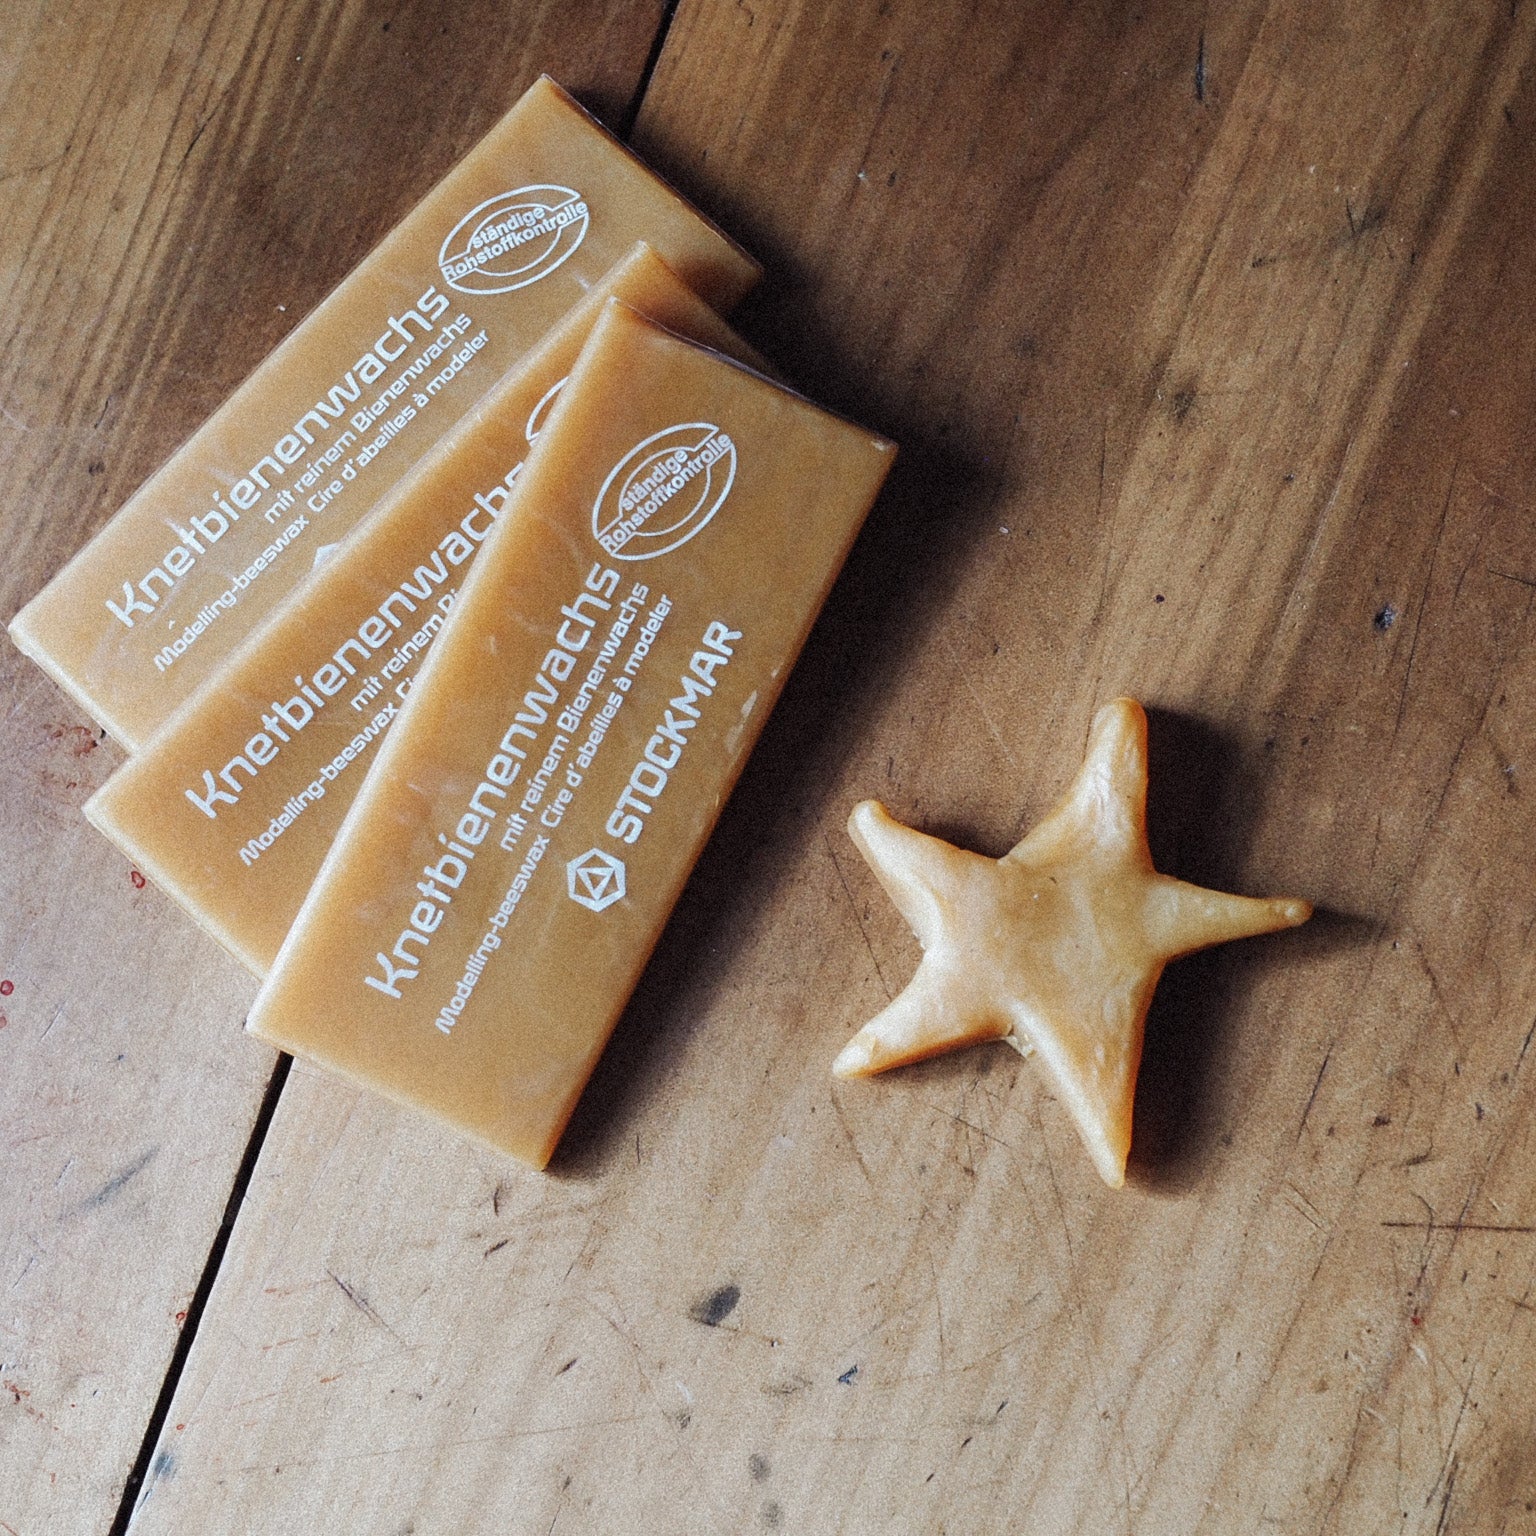 Stockmar Modelling Beeswax Bar